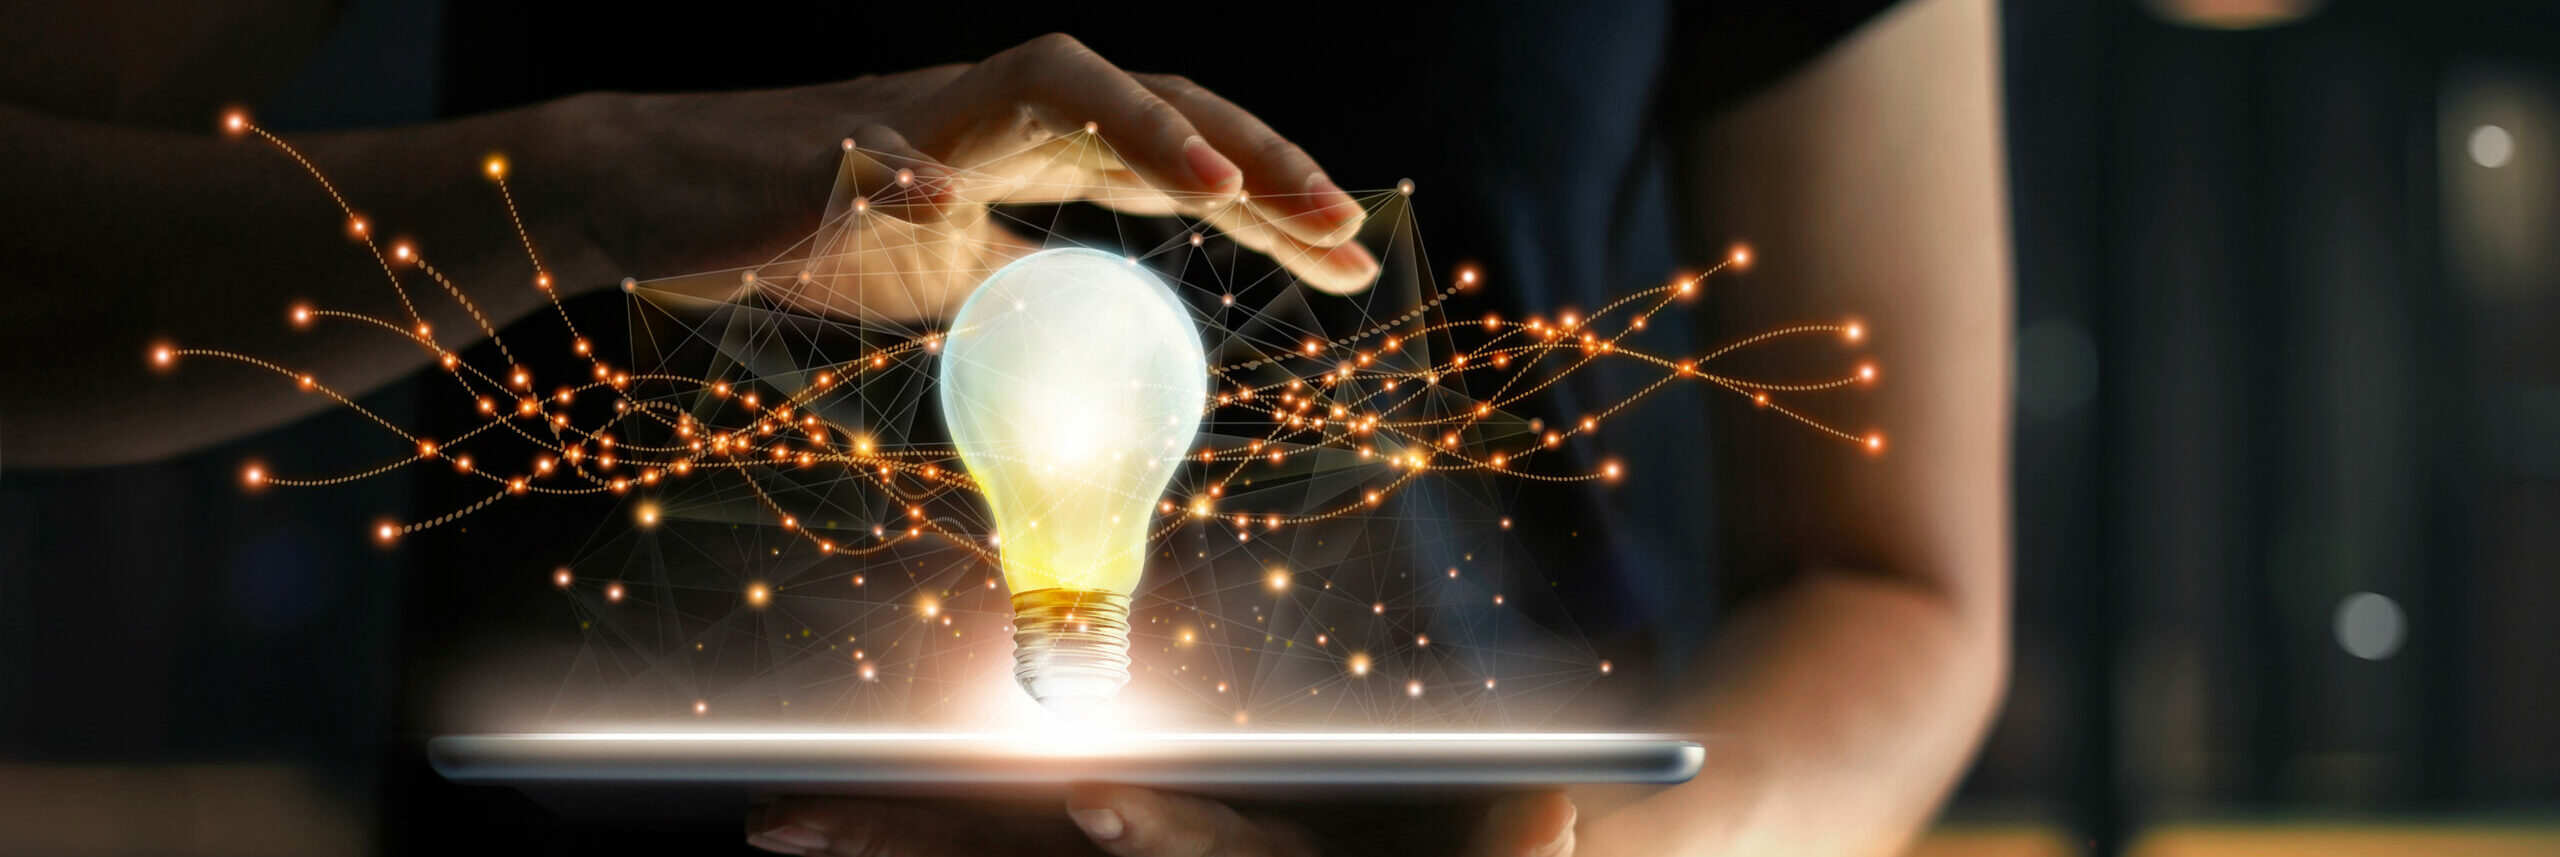 man using tablet with graphic image of lightbulb